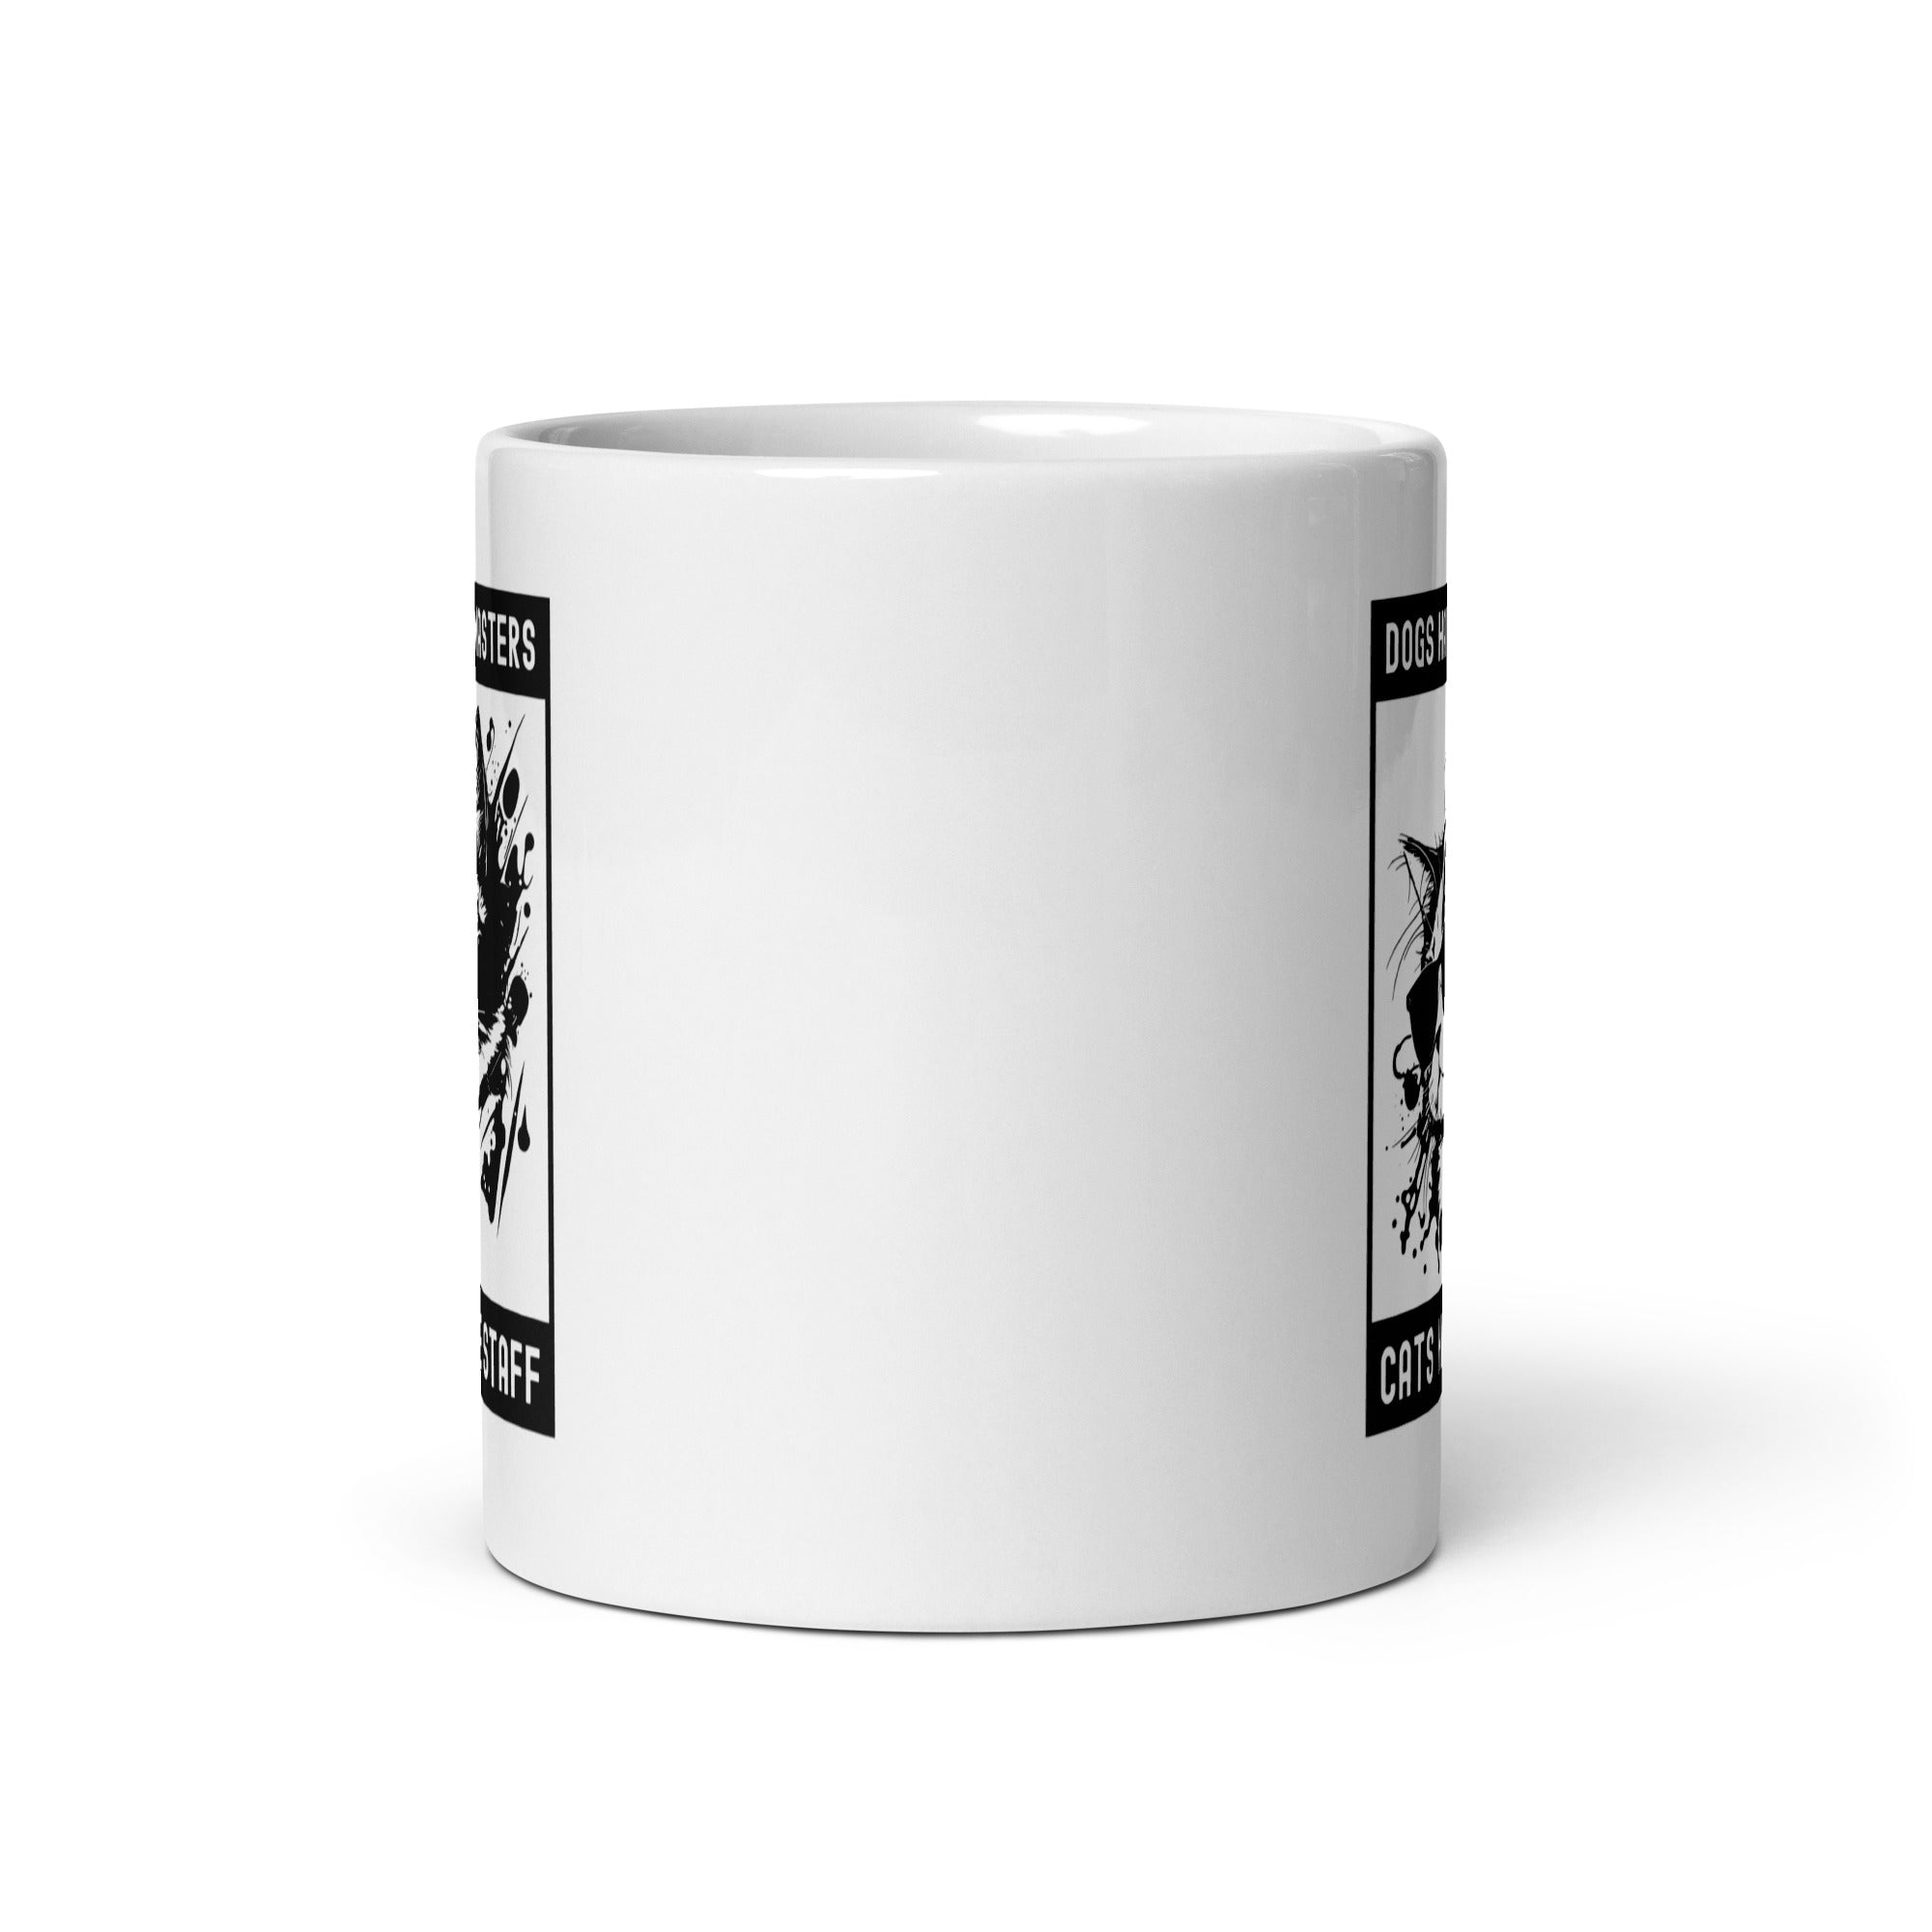 White glossy mug | Dogs have masters cats have staff